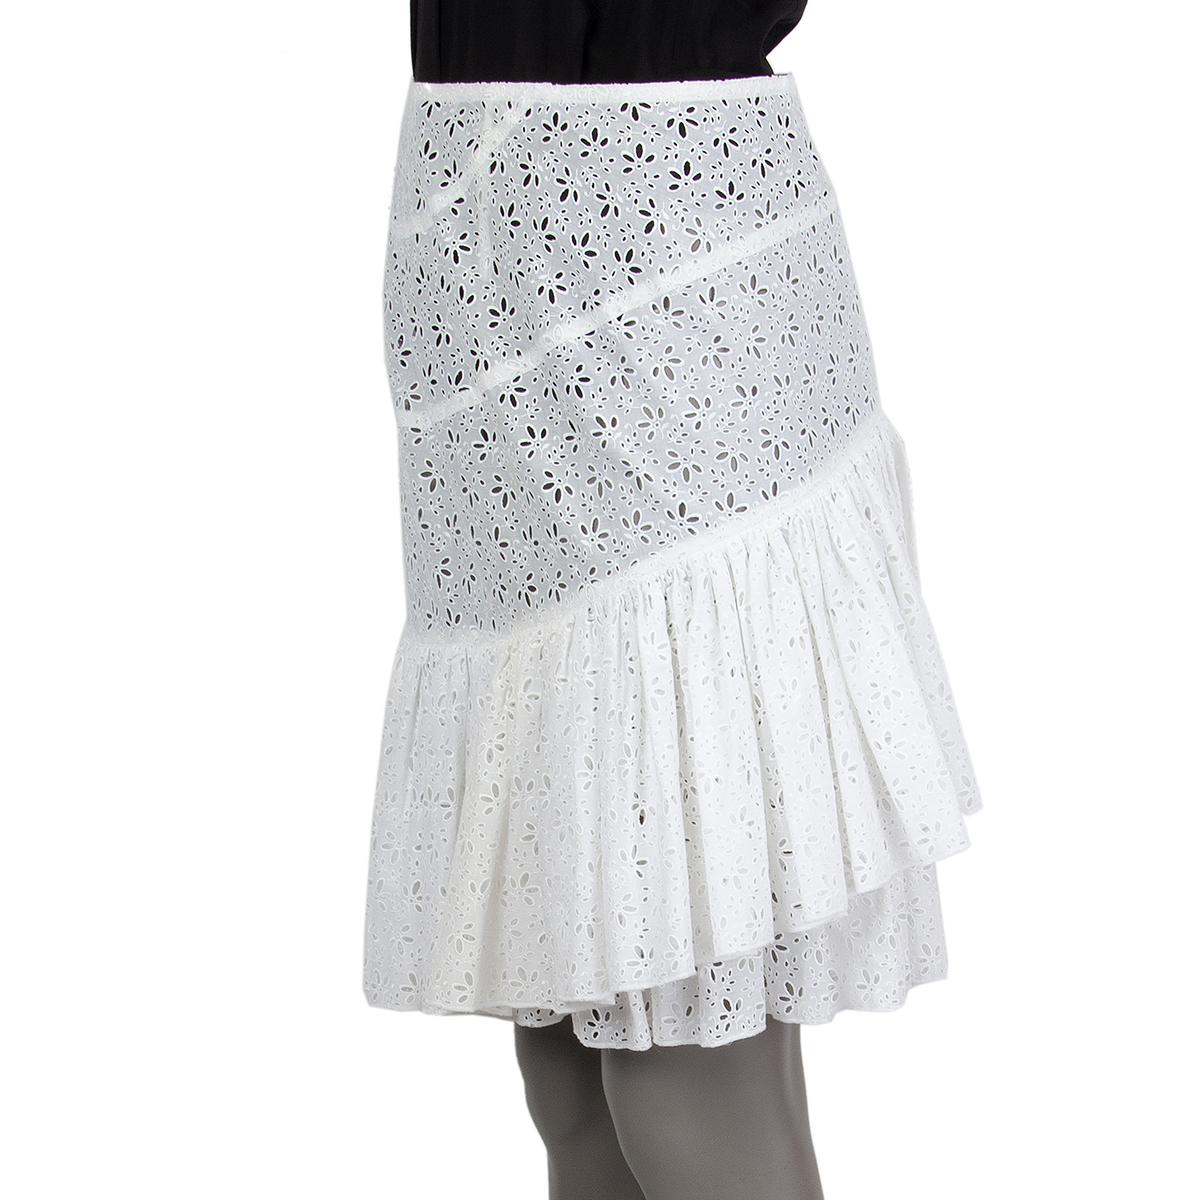 Gray ALAIA white cotton BRODERIE ANGLAISE EMBROIDERED RUCHEDSkirt 40 M